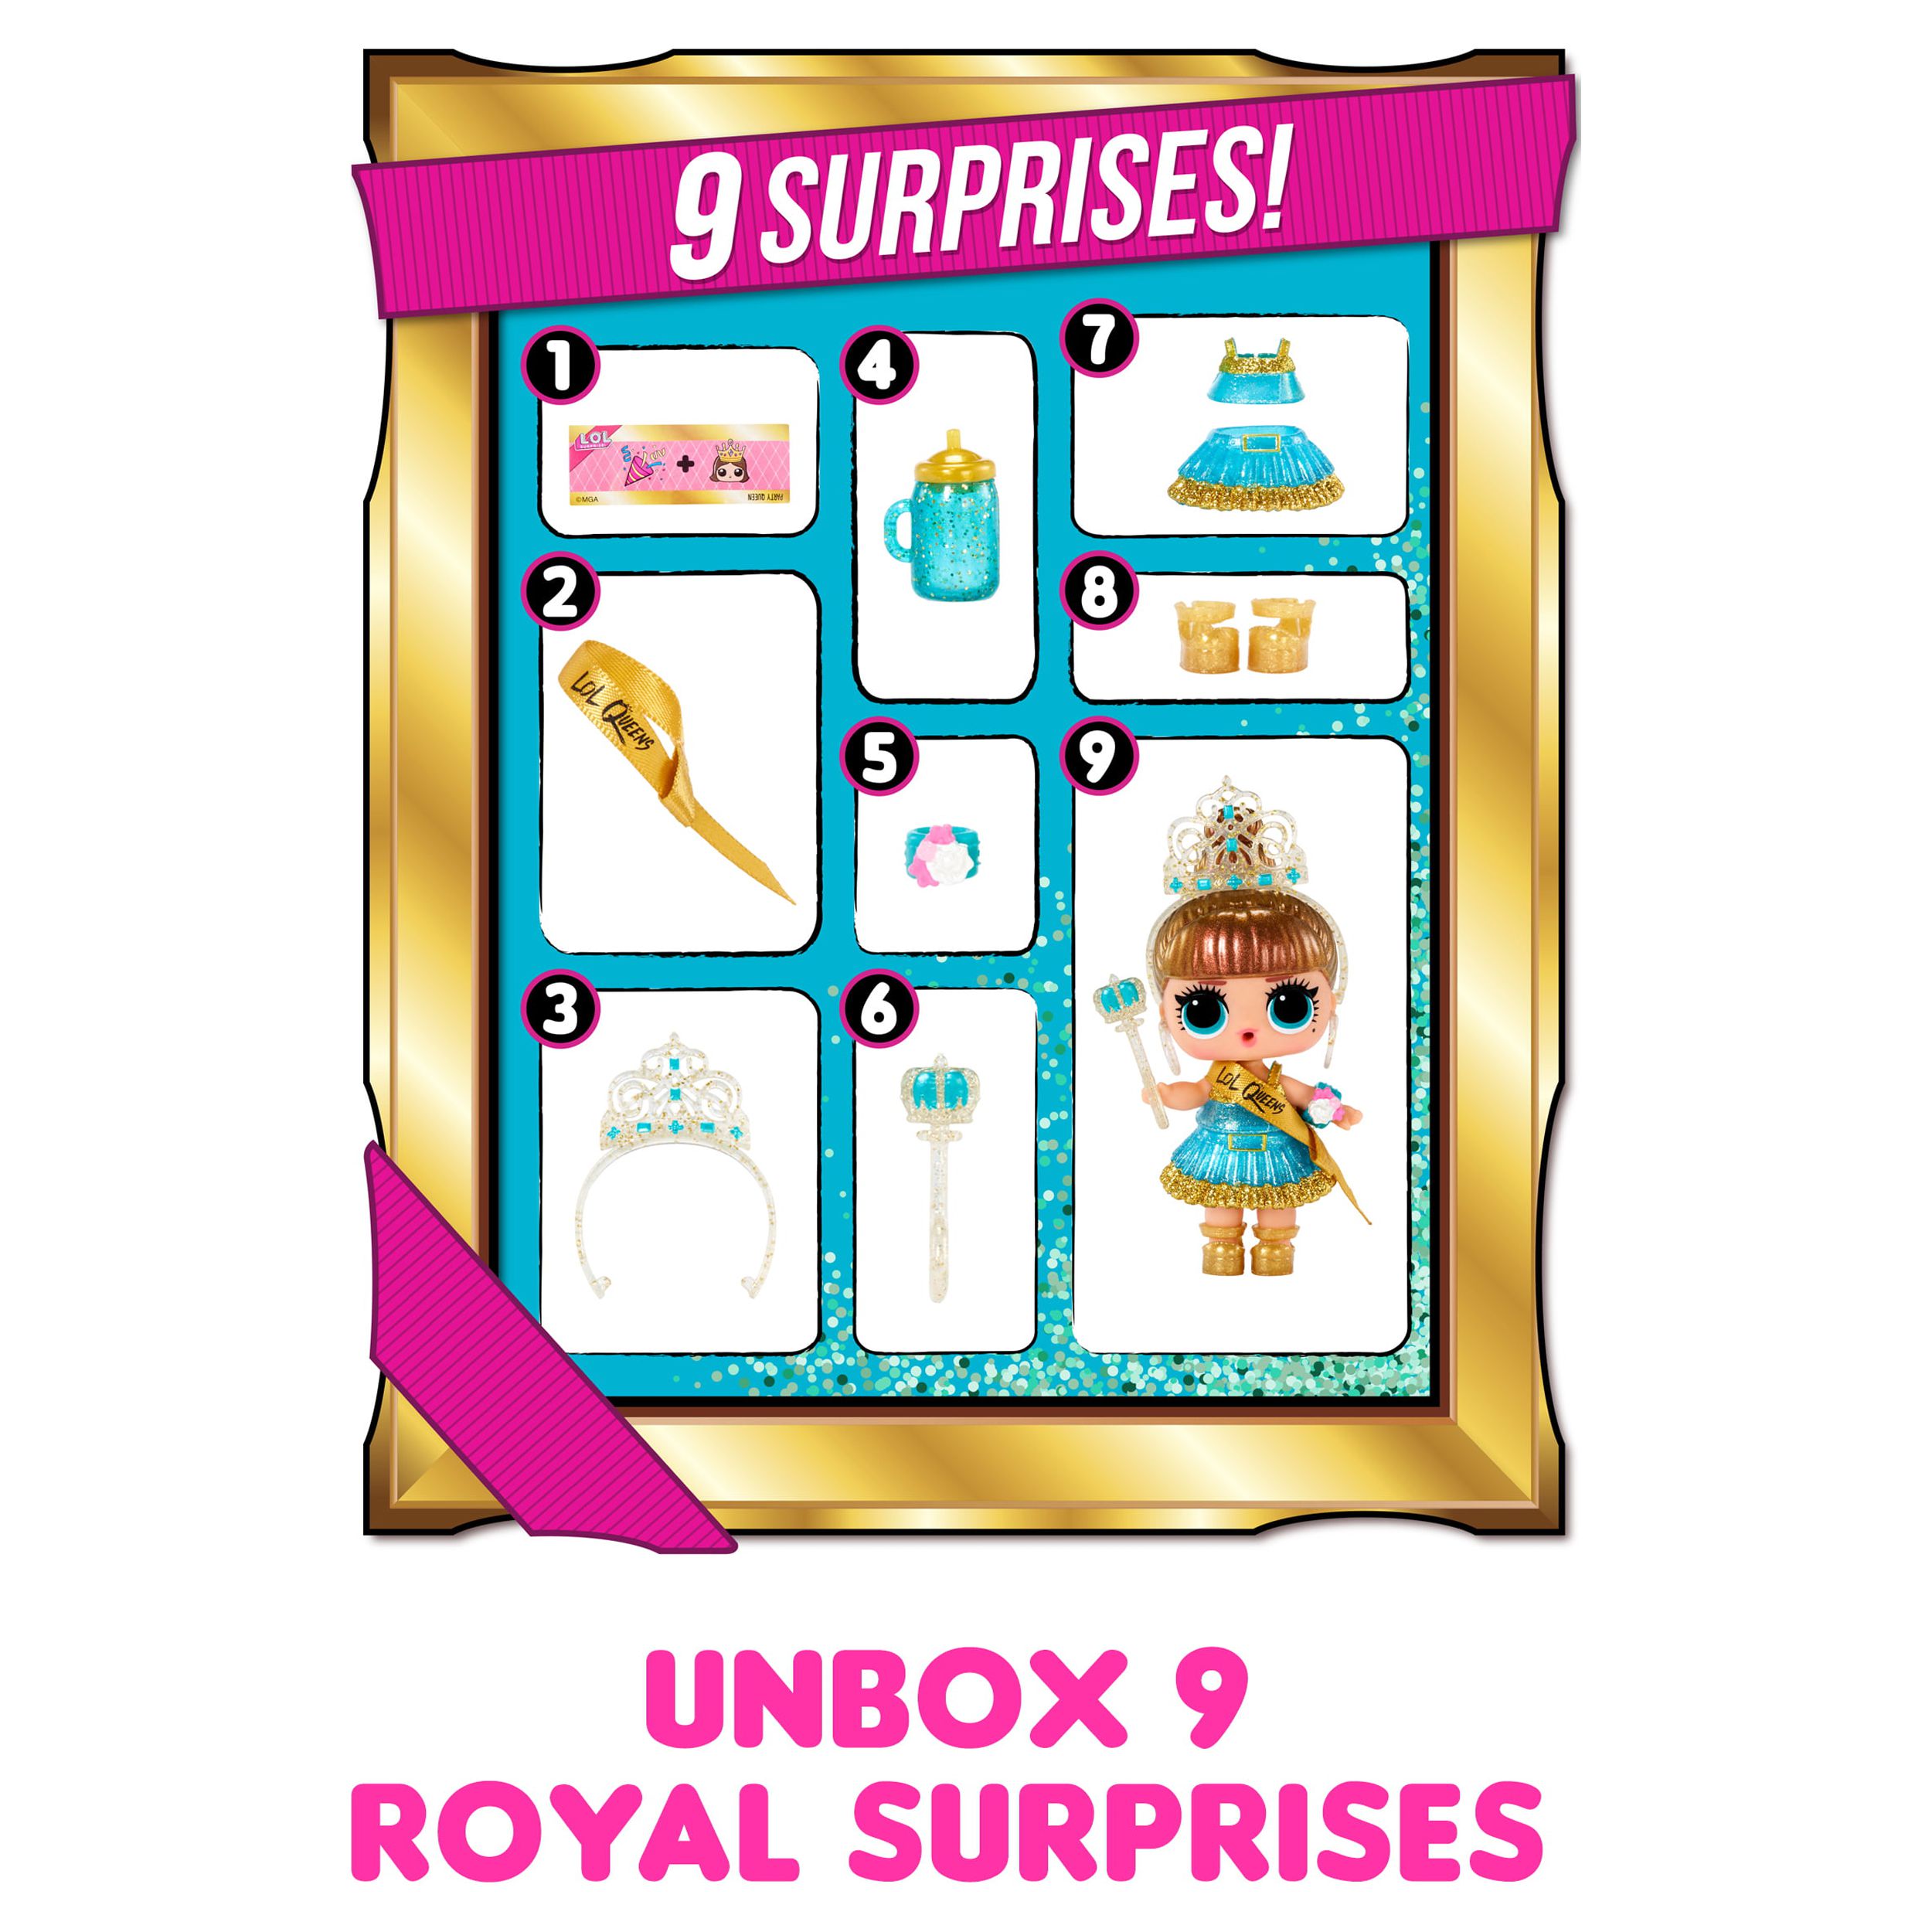 lol surprise queens dolls with 9 surprises including doll, fashions, and royal themed accessories - great gift for girls age 4+ - image 4 of 7